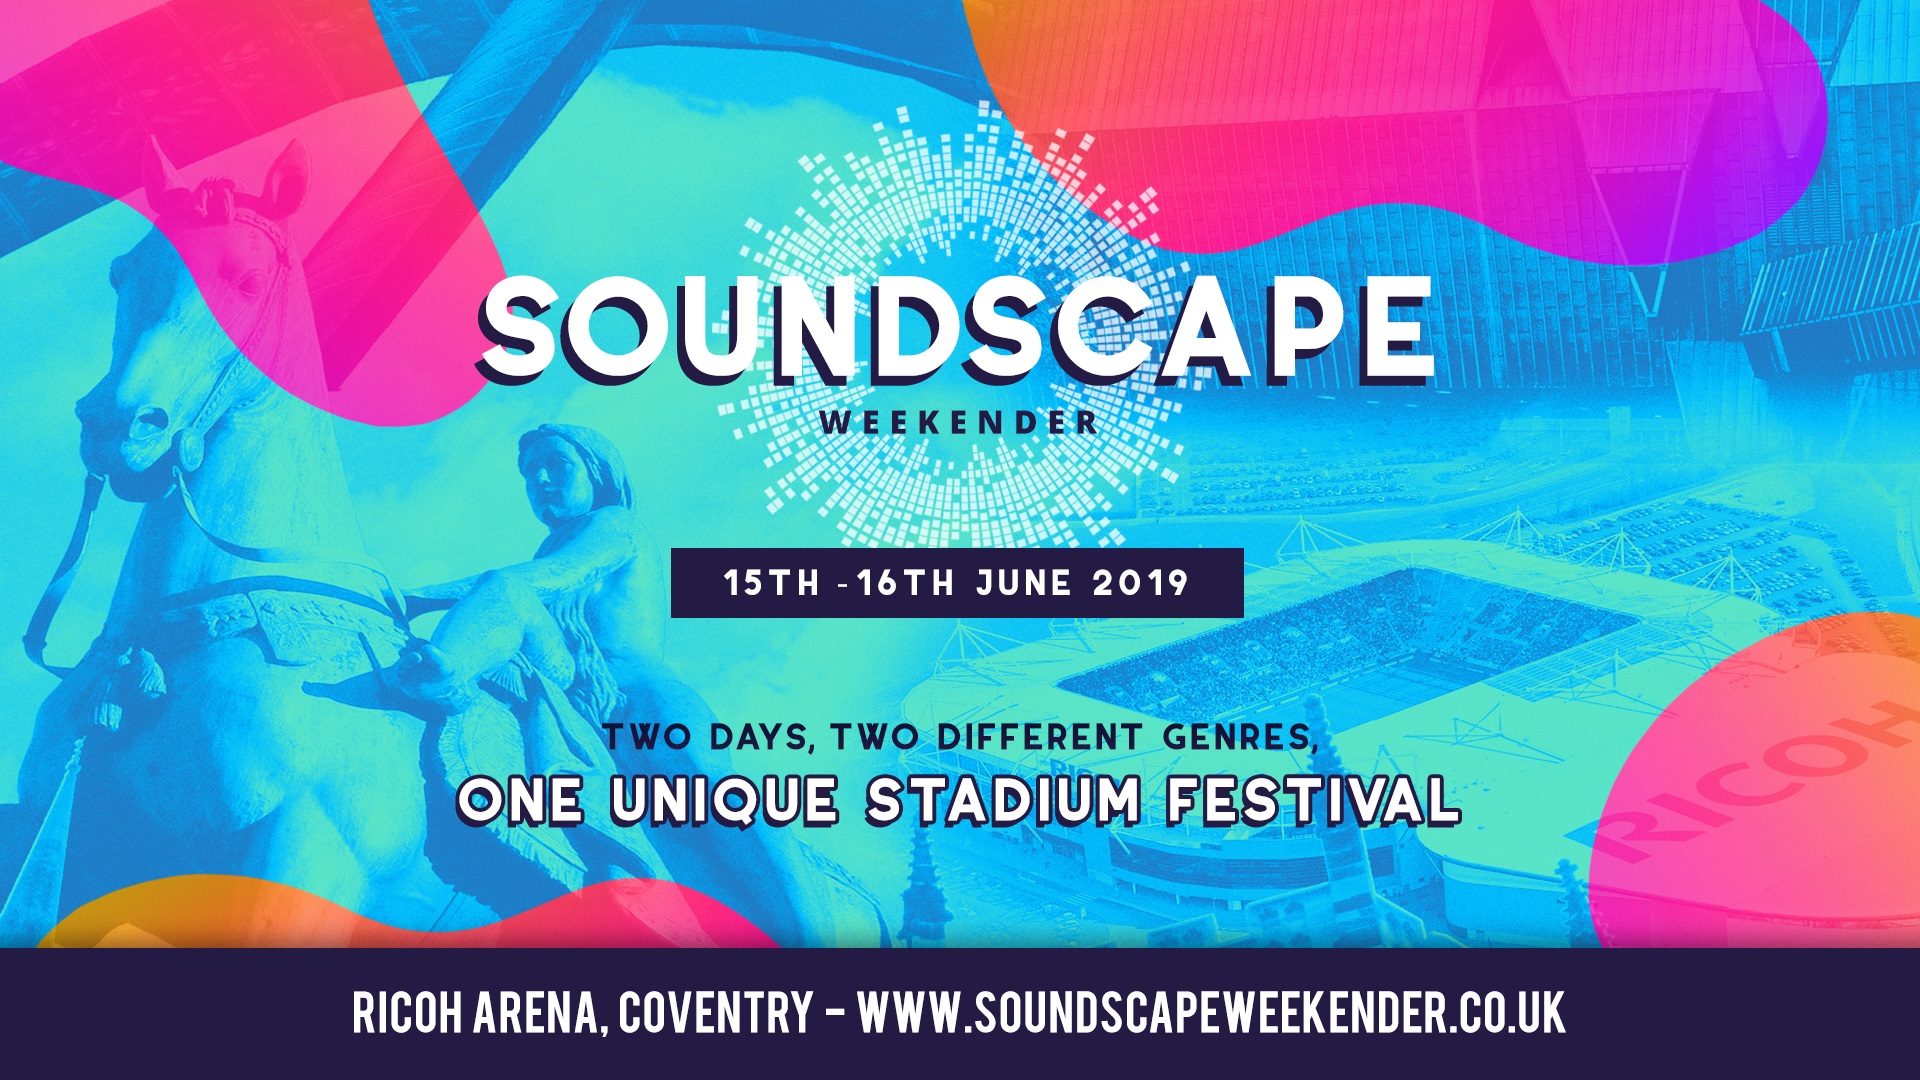 New music festival coming to Ricoh Arena